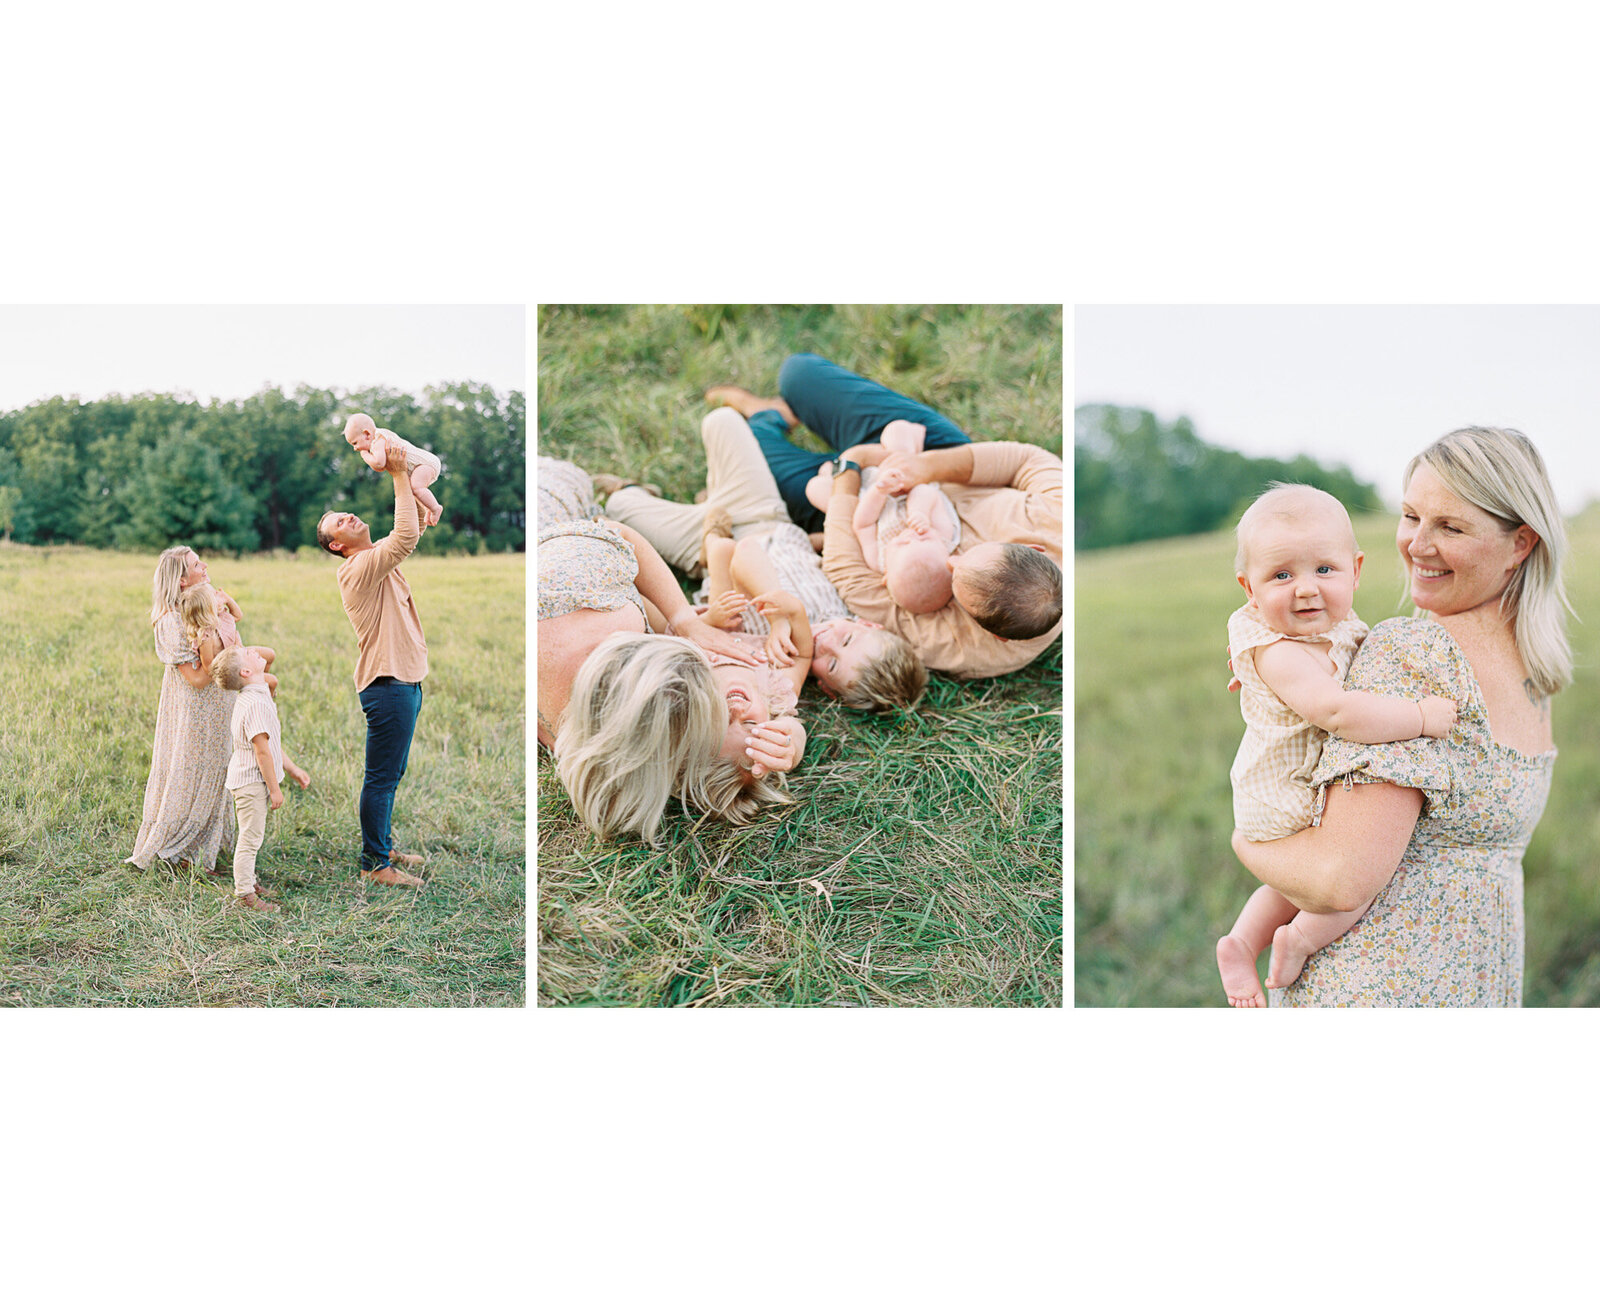 family in high end clothing during summer family session in a grassy field by Milwaukee family photographer, Talia Laird Photography